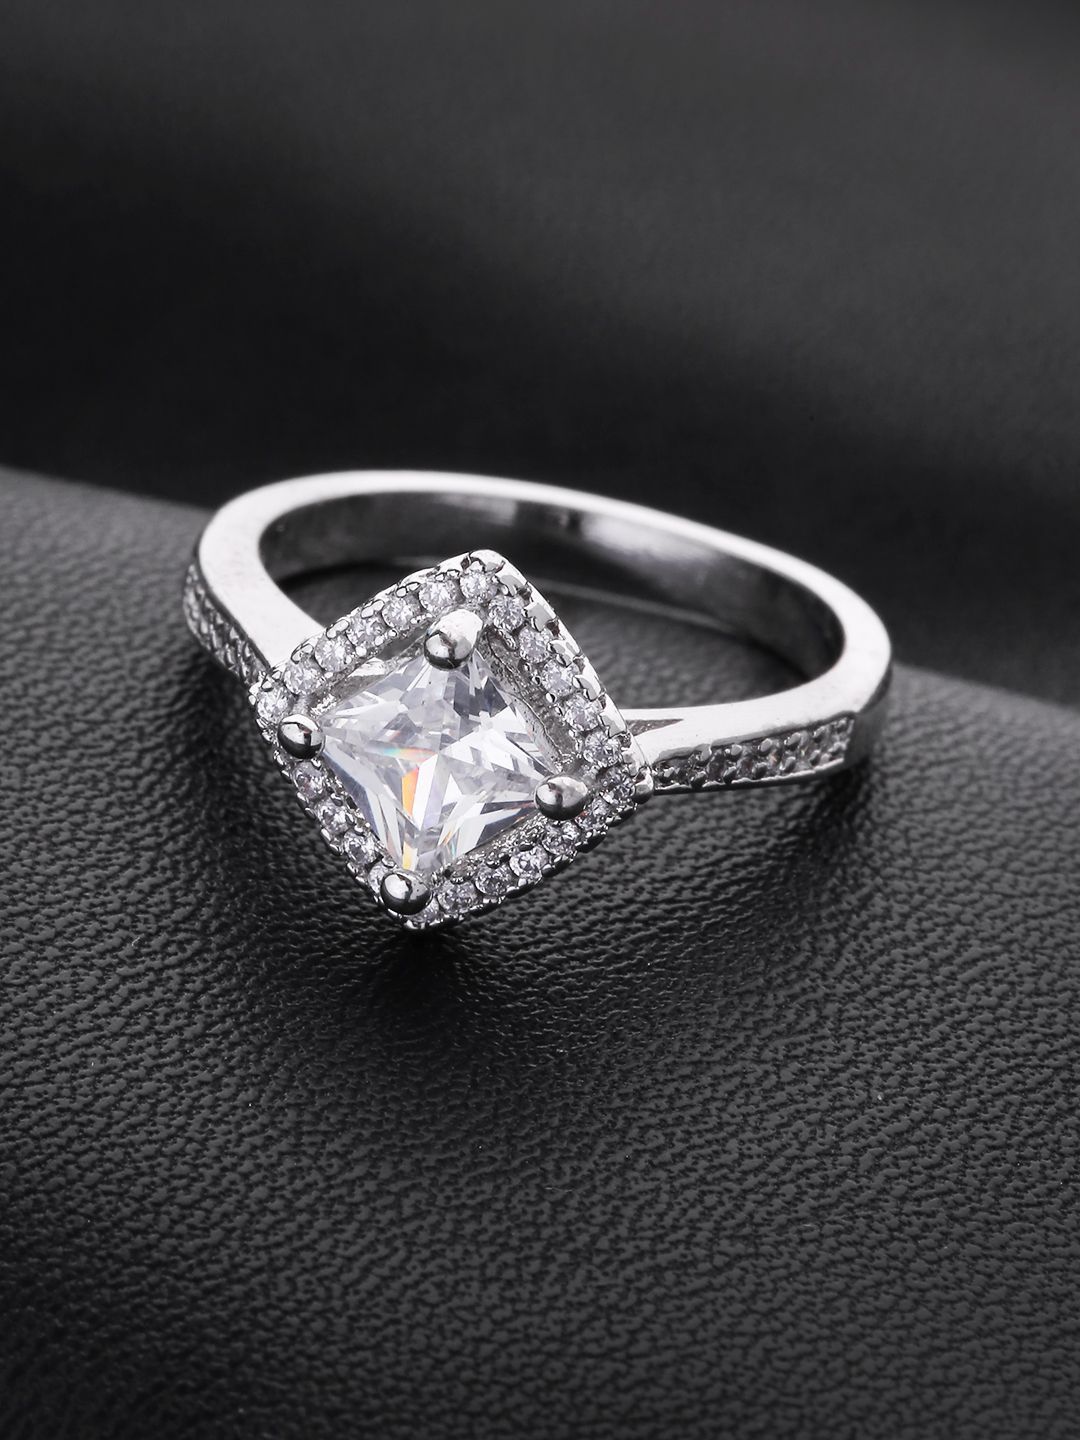 3/8 Ctw Diamond Square Shape Semi-Mount Engagement Ring in 14K White Gold |  Dahlkemper's Jewelry